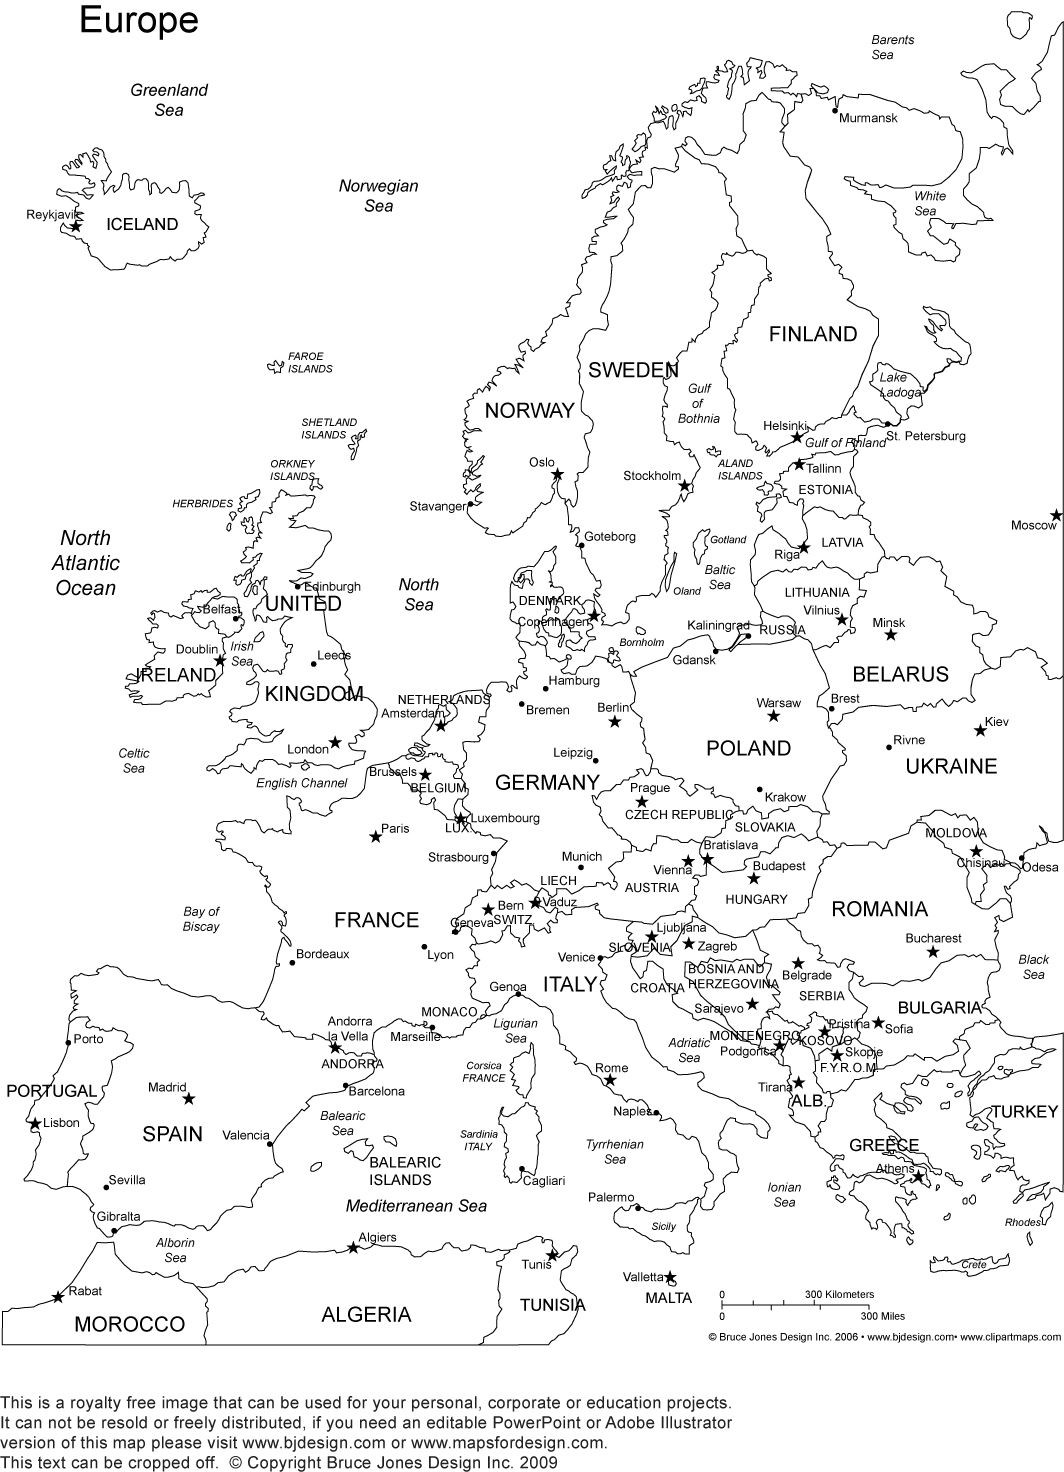 Printable Map With Countries New Europe Printable Blank Map Royalty Free As Well As Other